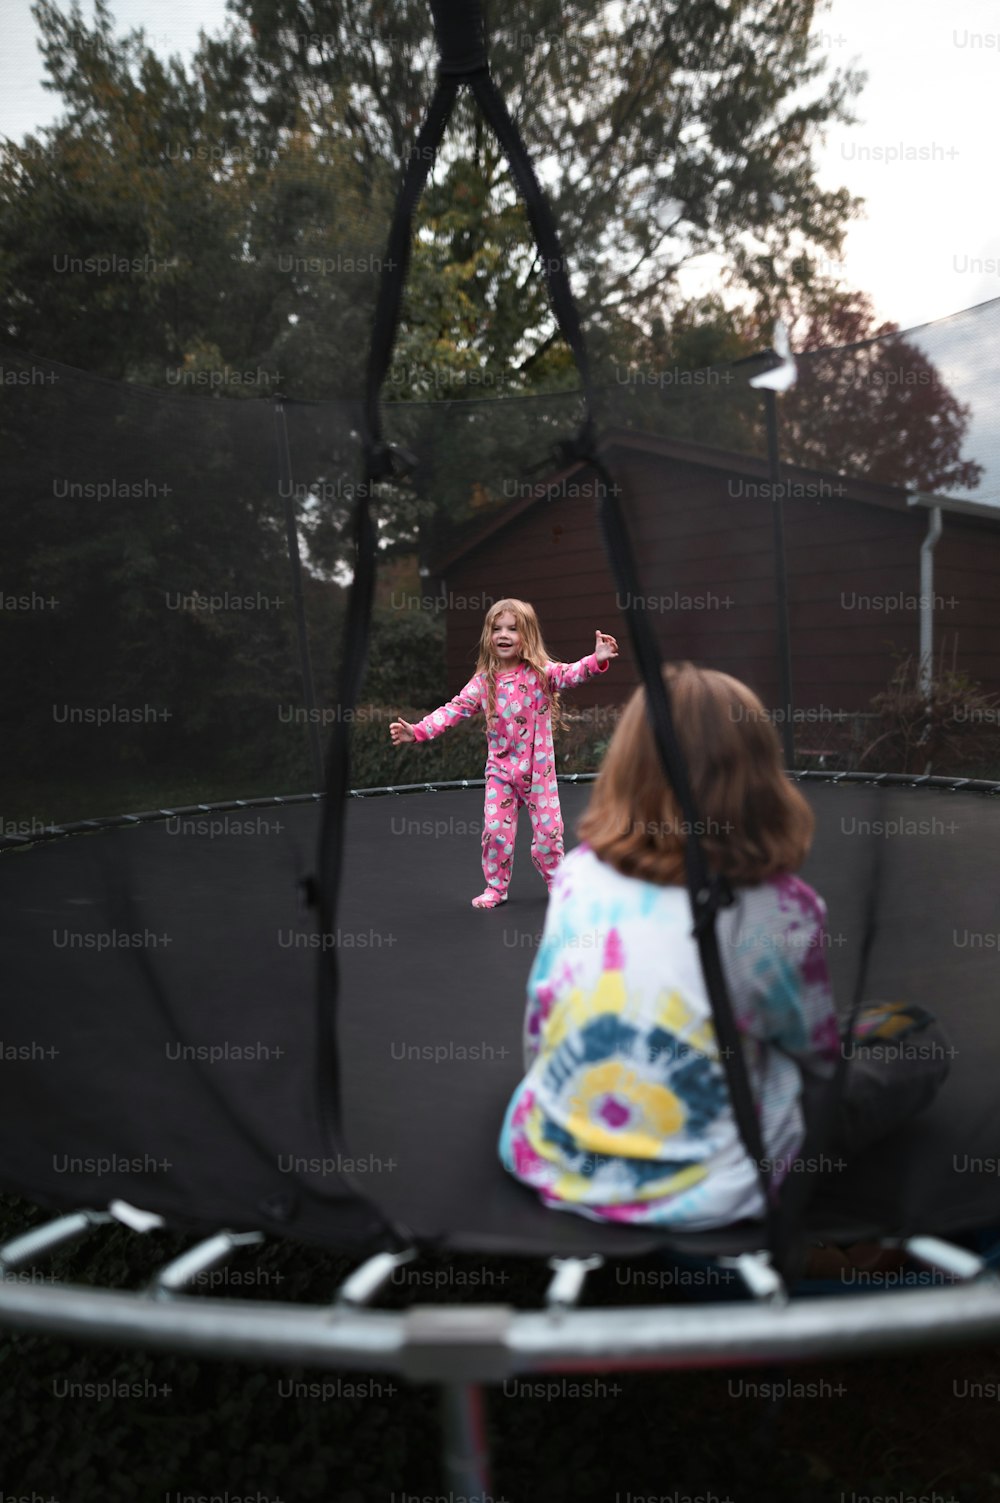 two young girls playing on a trampoline in a backyard